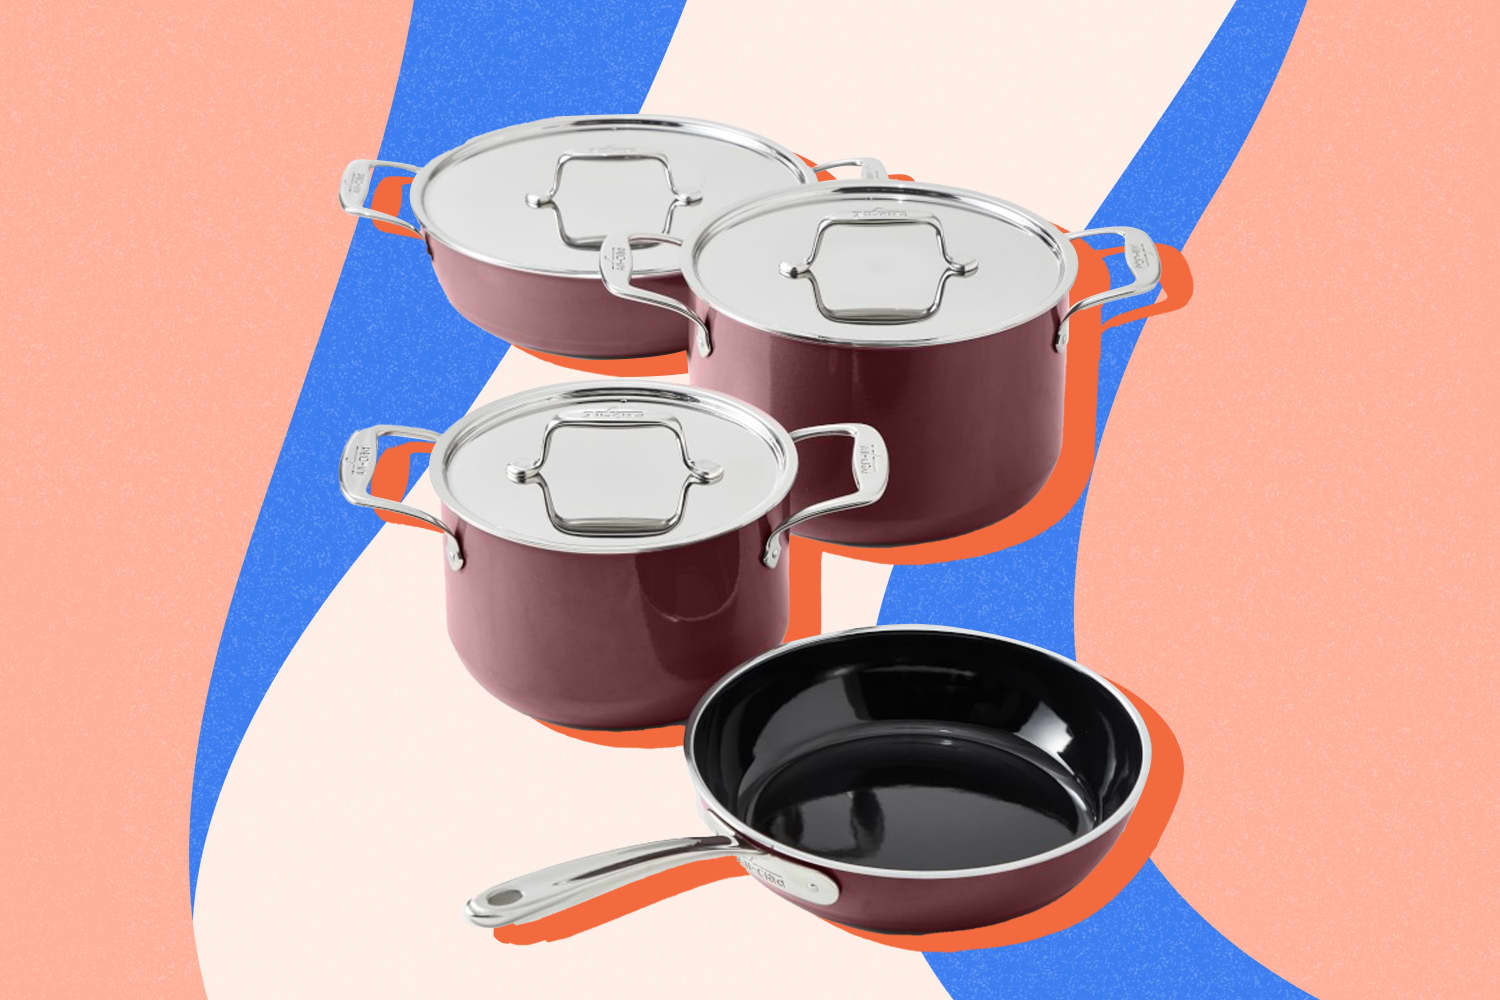 All-Clad Pots and Pans Review